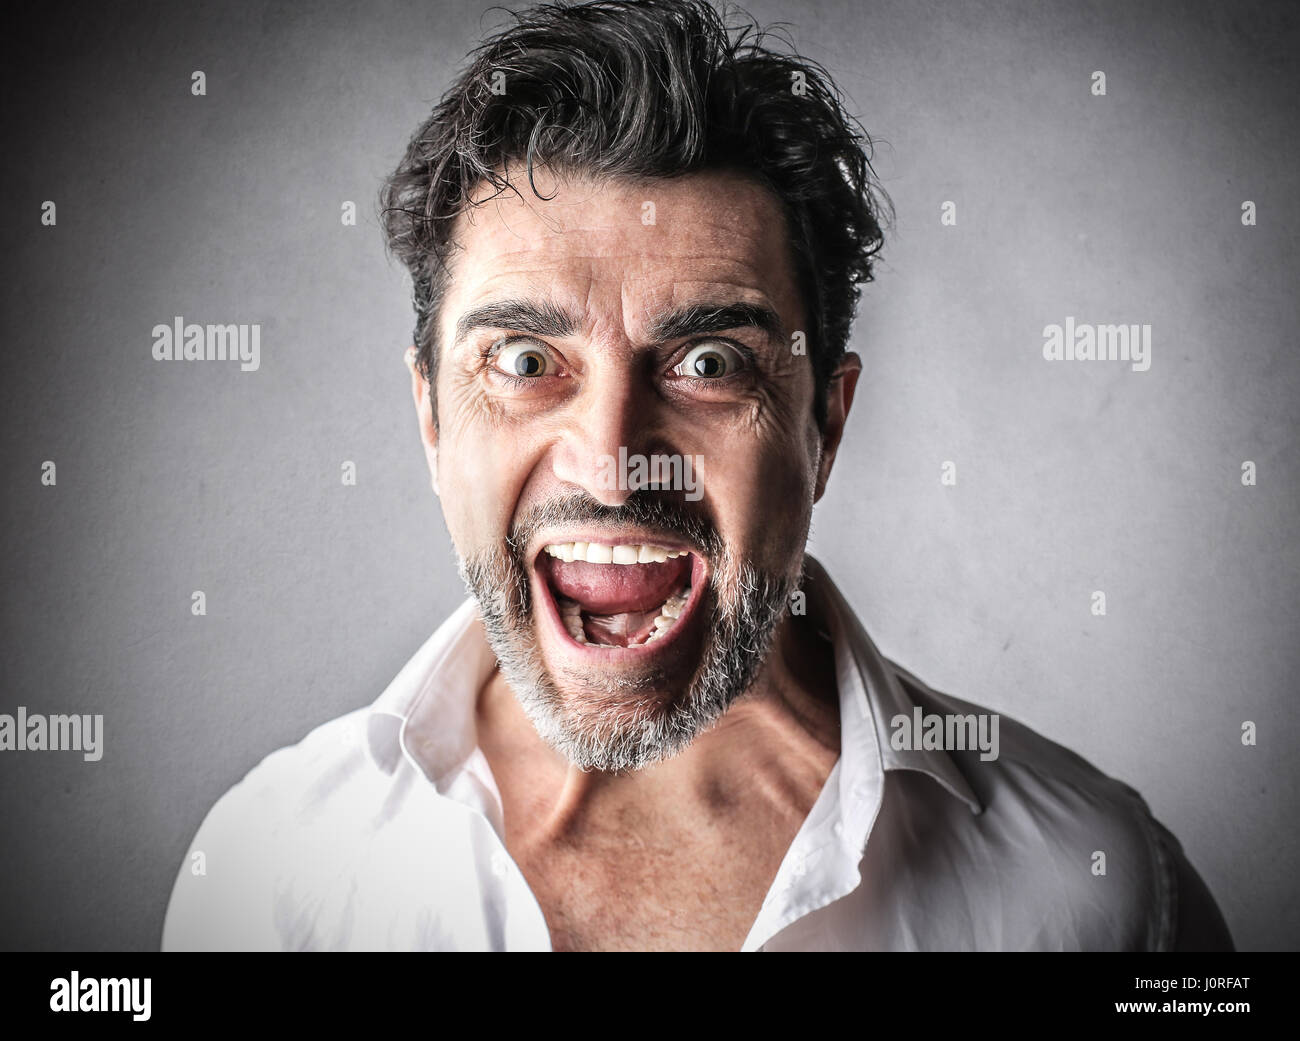 Man feeling yelling in excitement Stock Photo